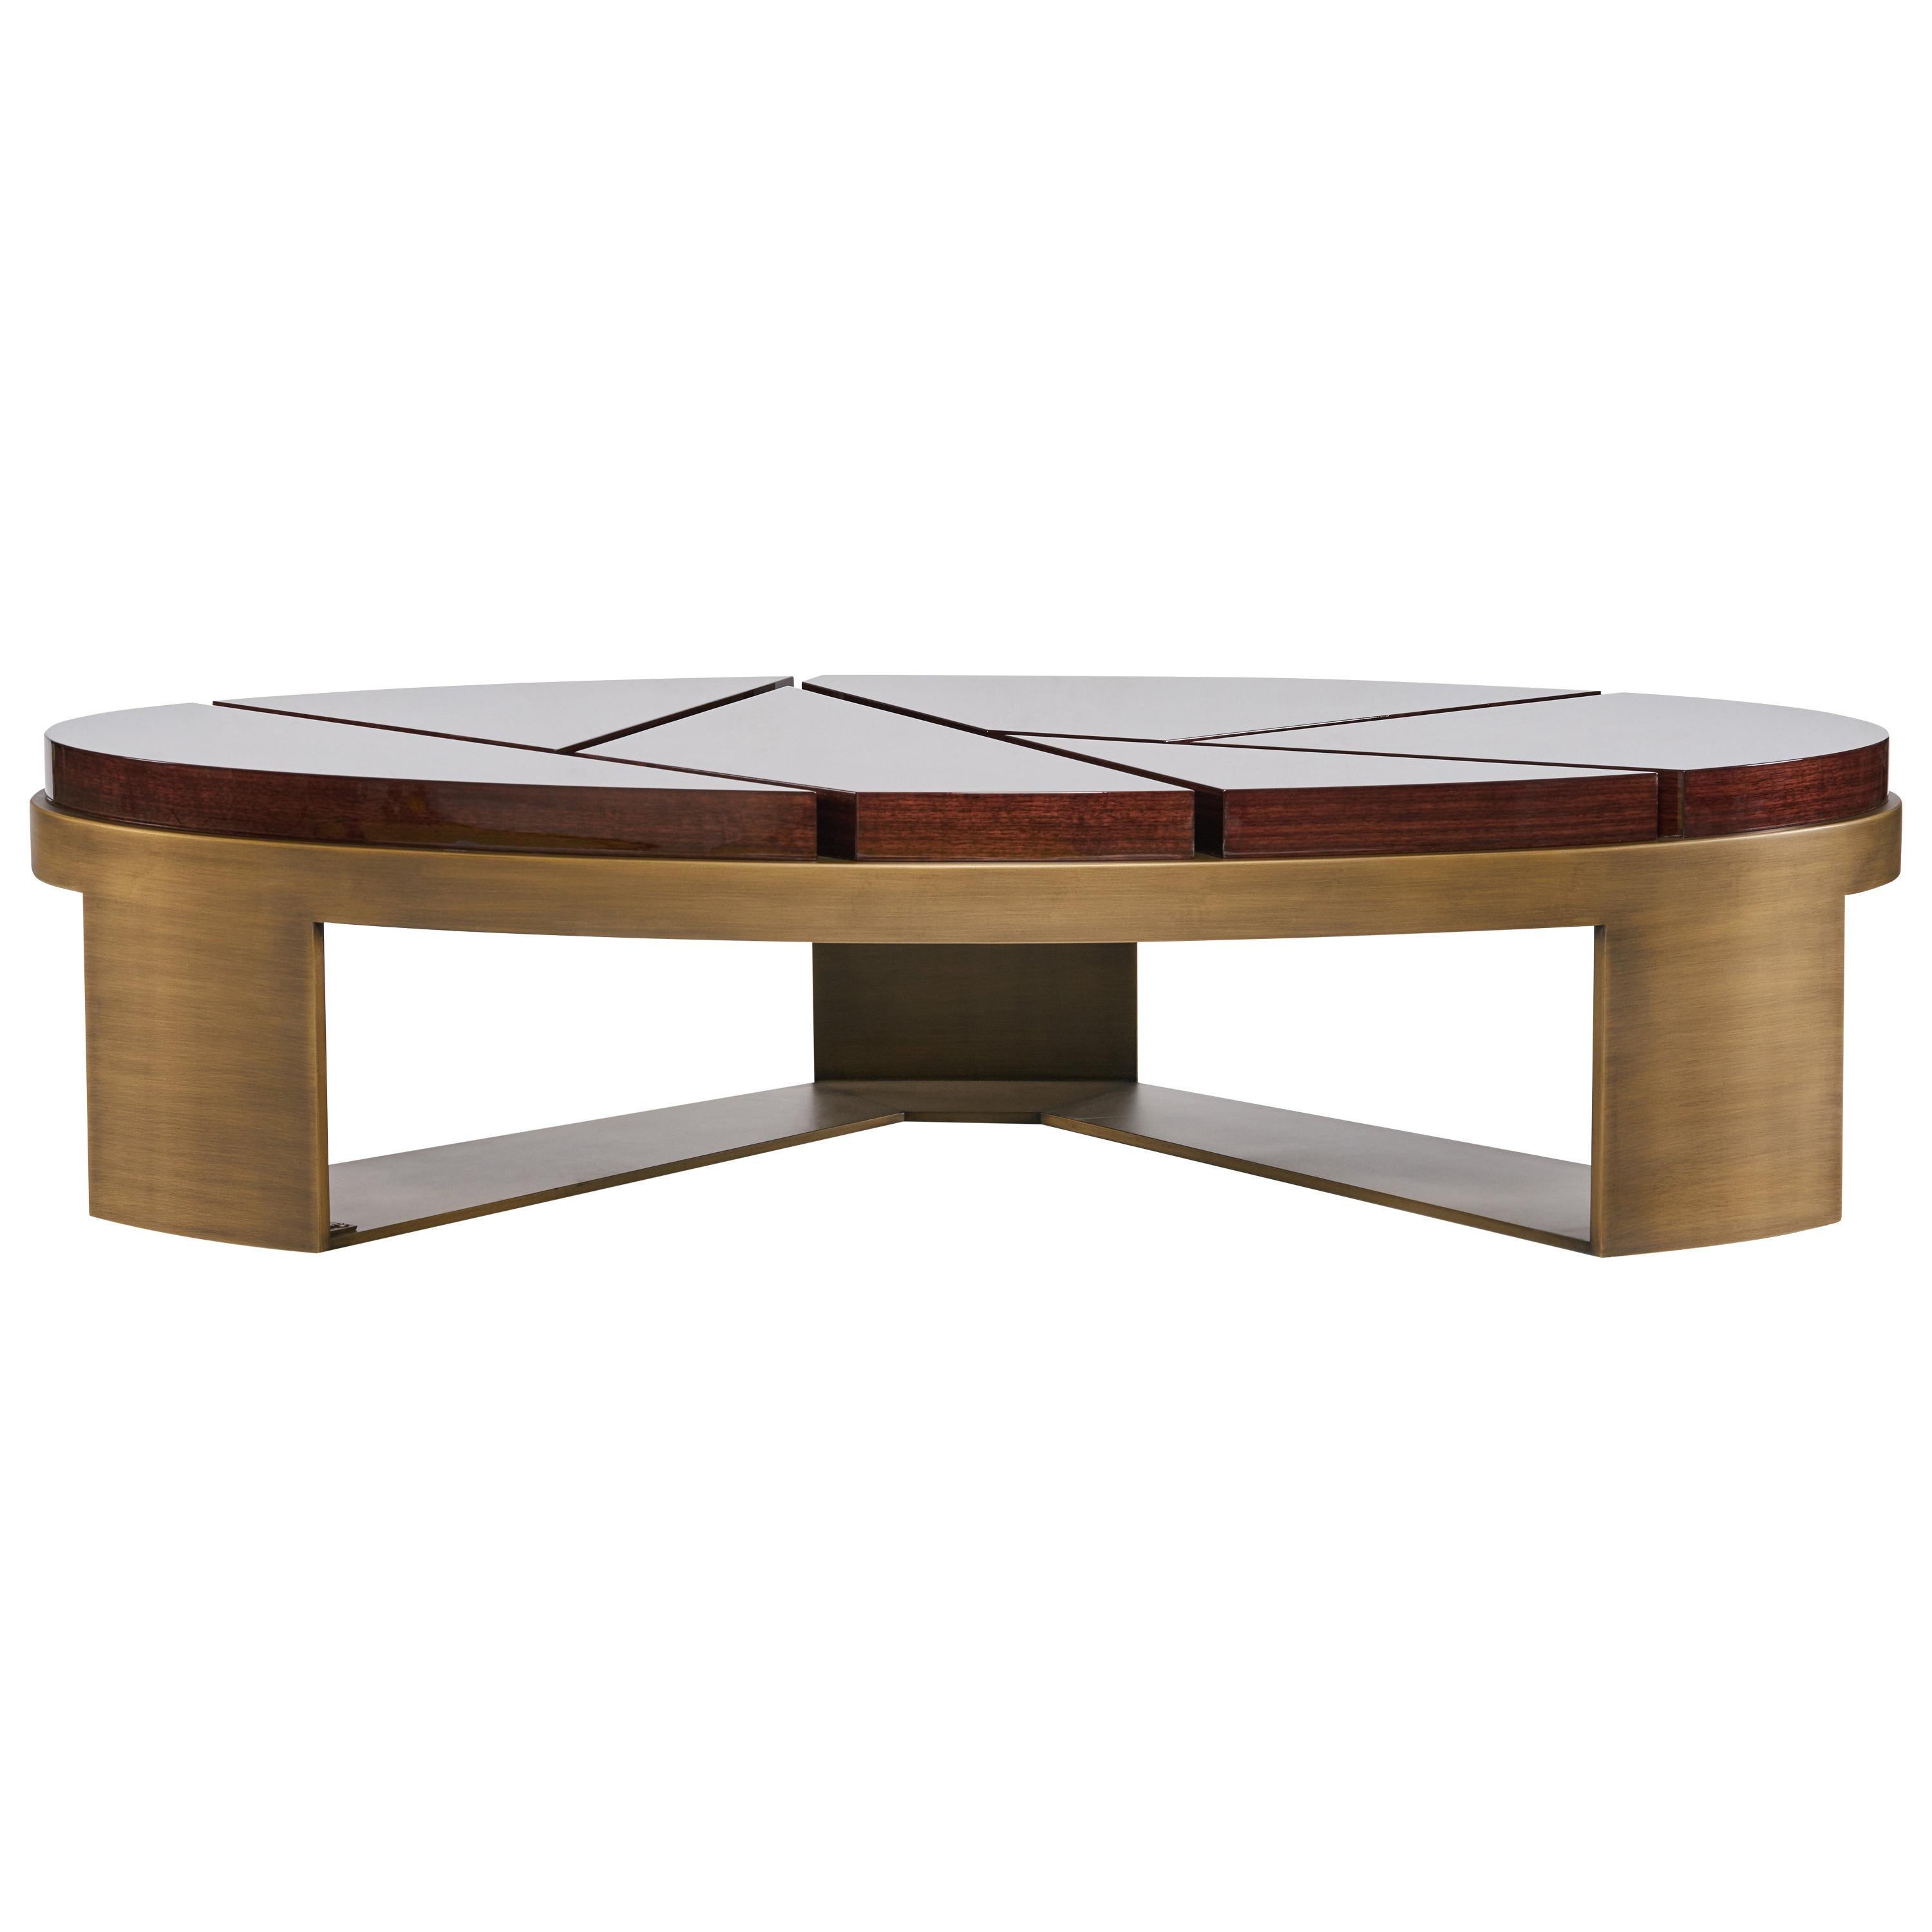 Aurora Coffee Table - High Gloss Timber - Size I For Sale